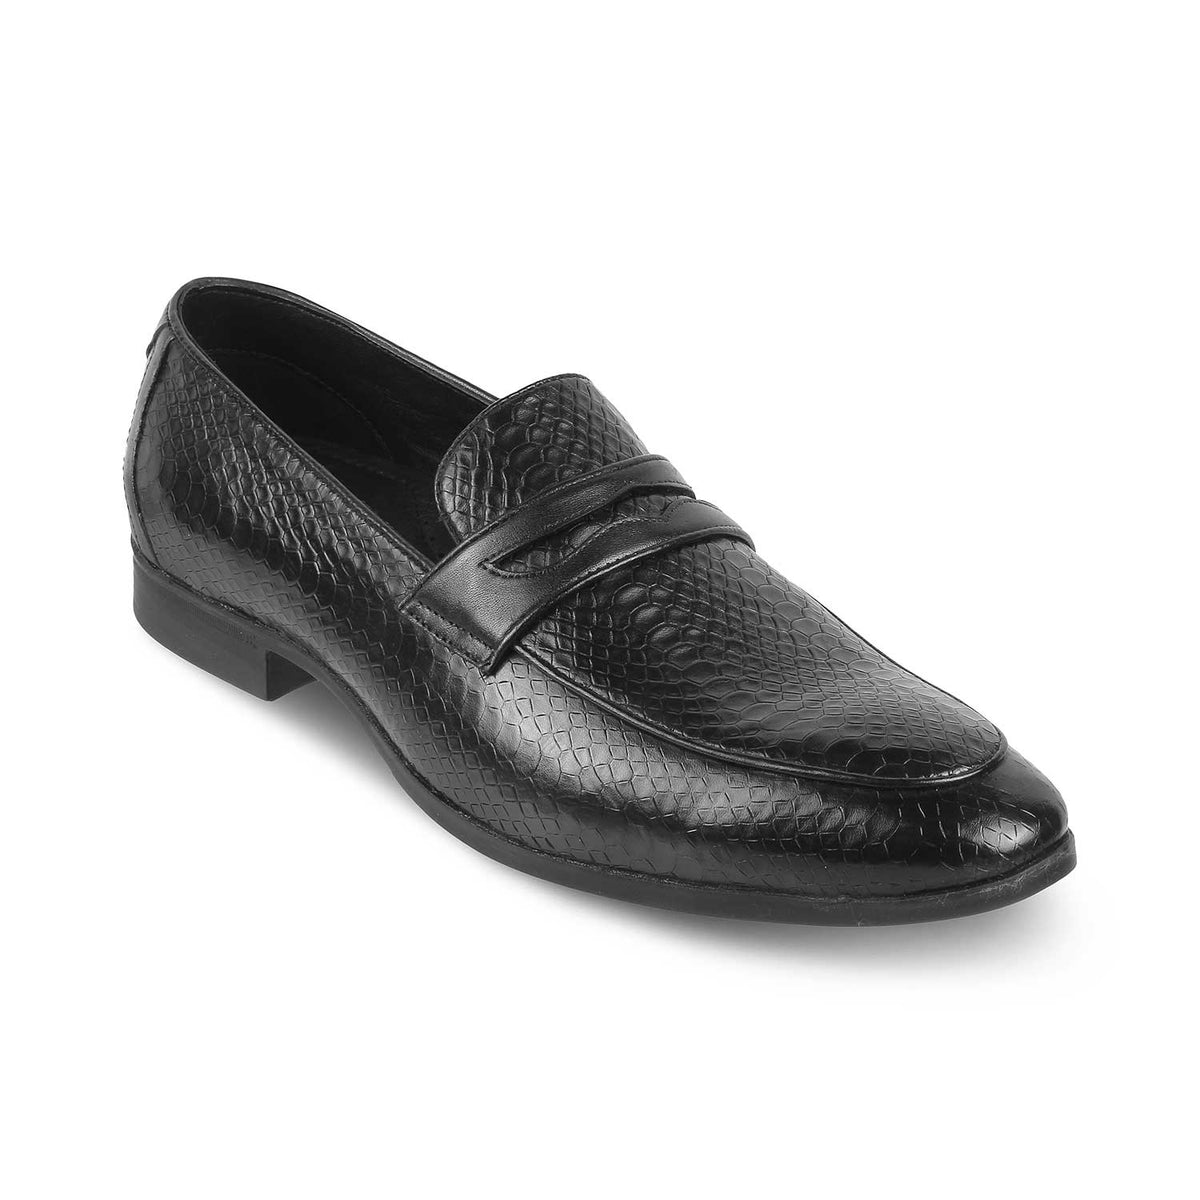 The Rosnake Black Men's Leather Loafers Tresmode - Tresmode